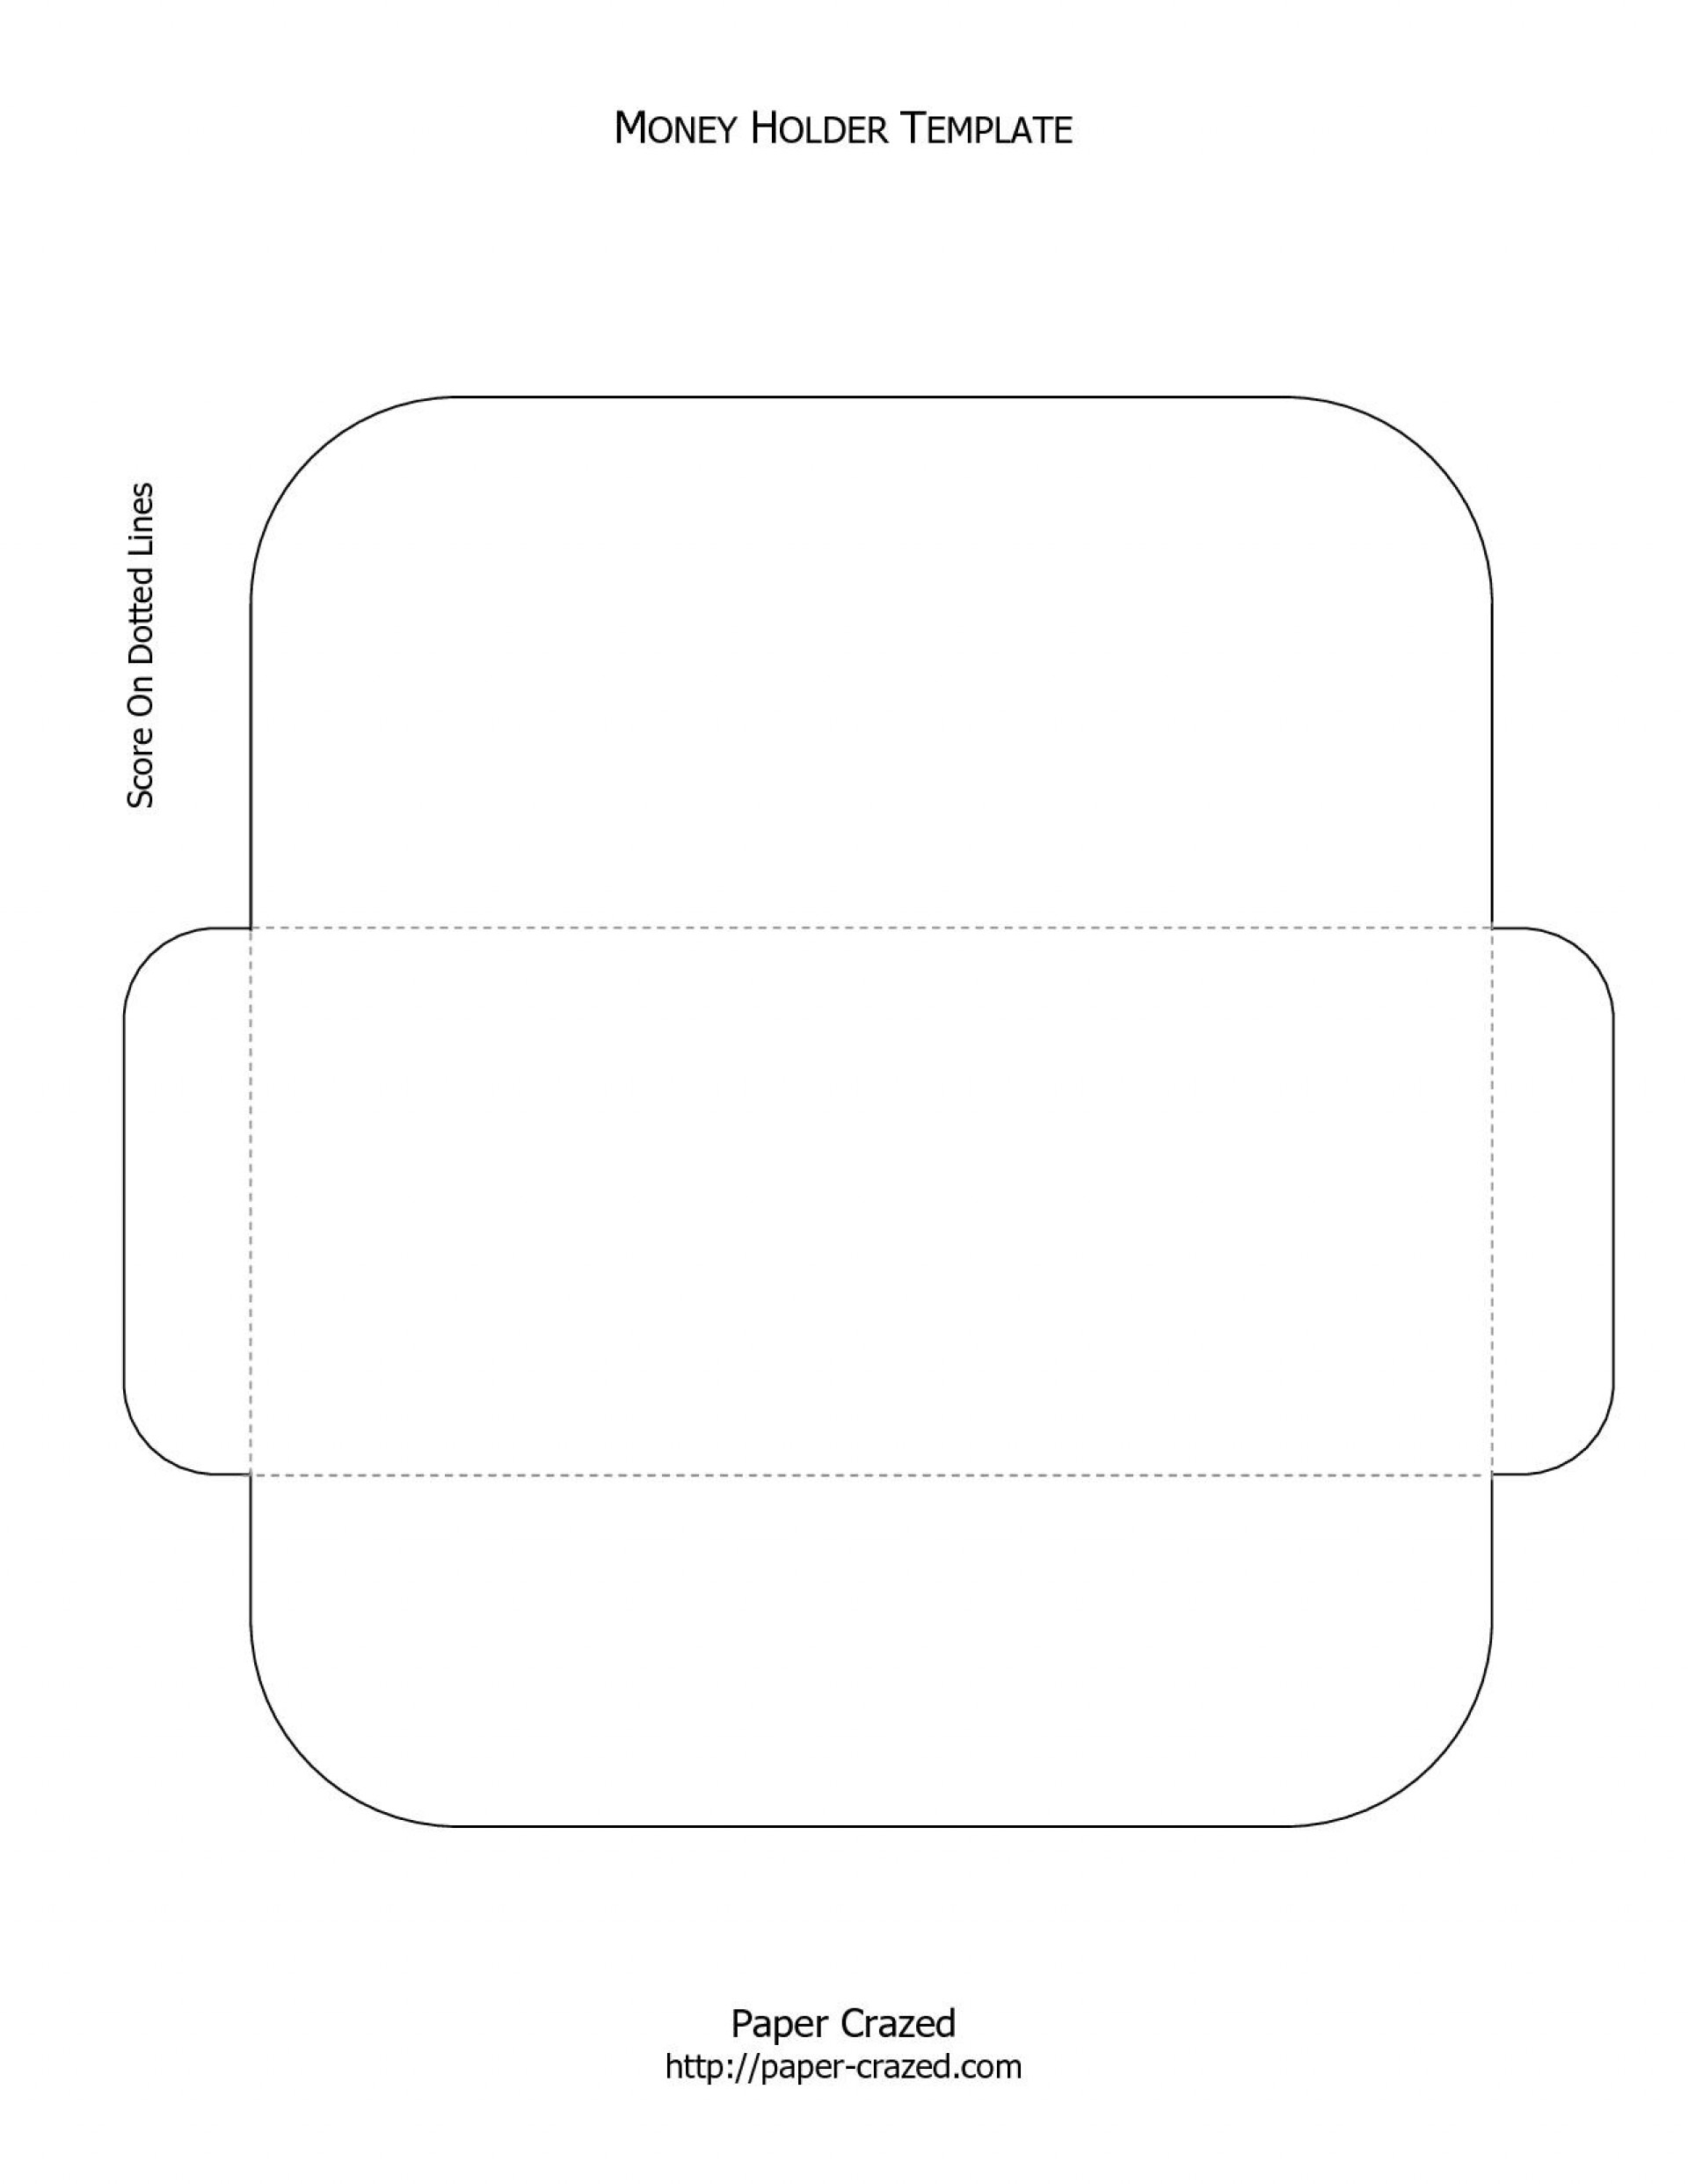 007 Gift Card Envelope Template Ideas Free Christmas Money Holder - Free Printable Christmas Money Holders